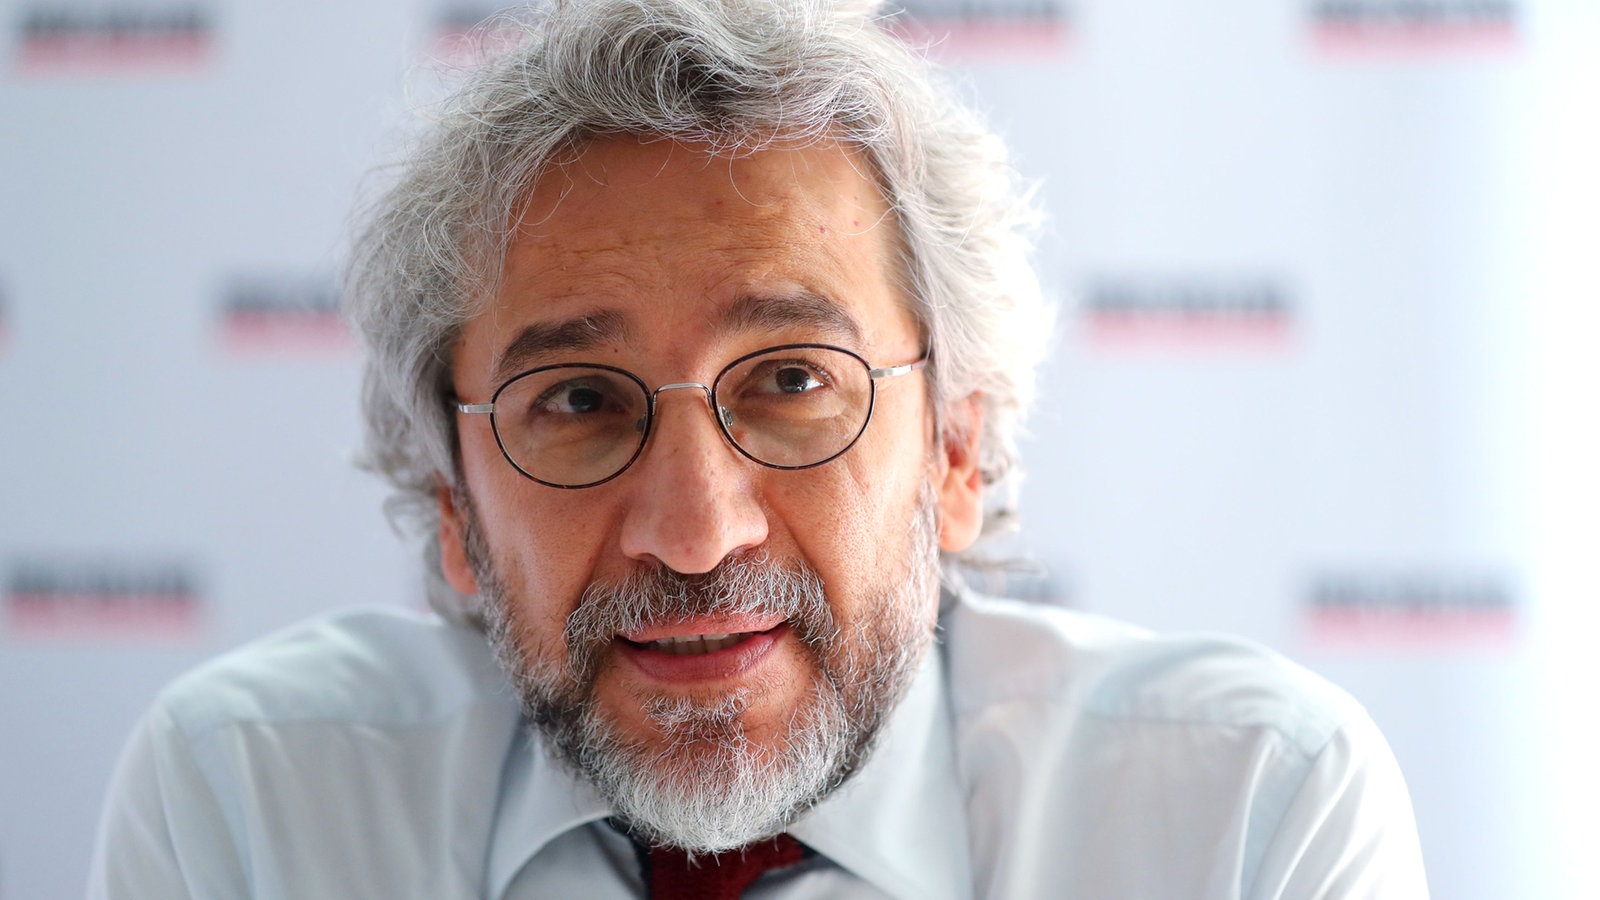 mfrr condemns the escalating judicial harassment of can dündar by